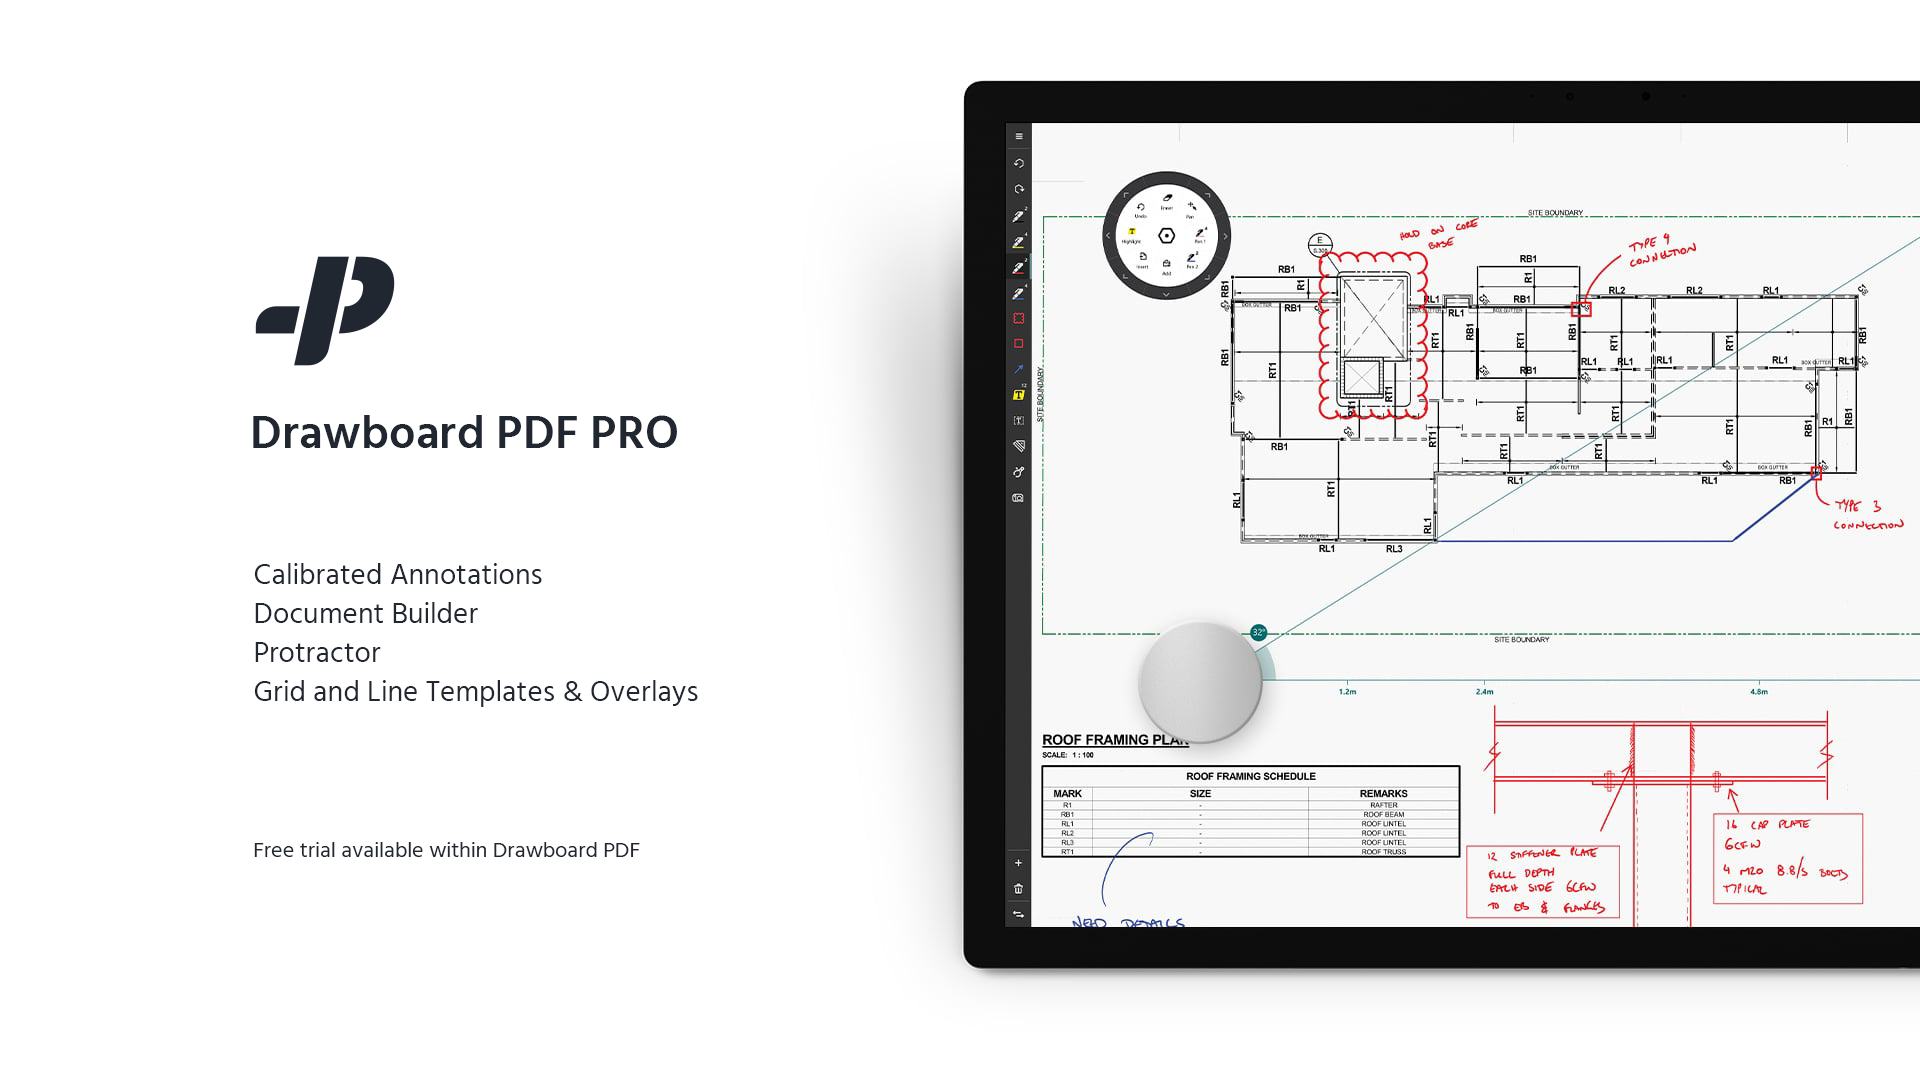 Drawboard PDF PRO advanced PDF features and Surface Dial integration